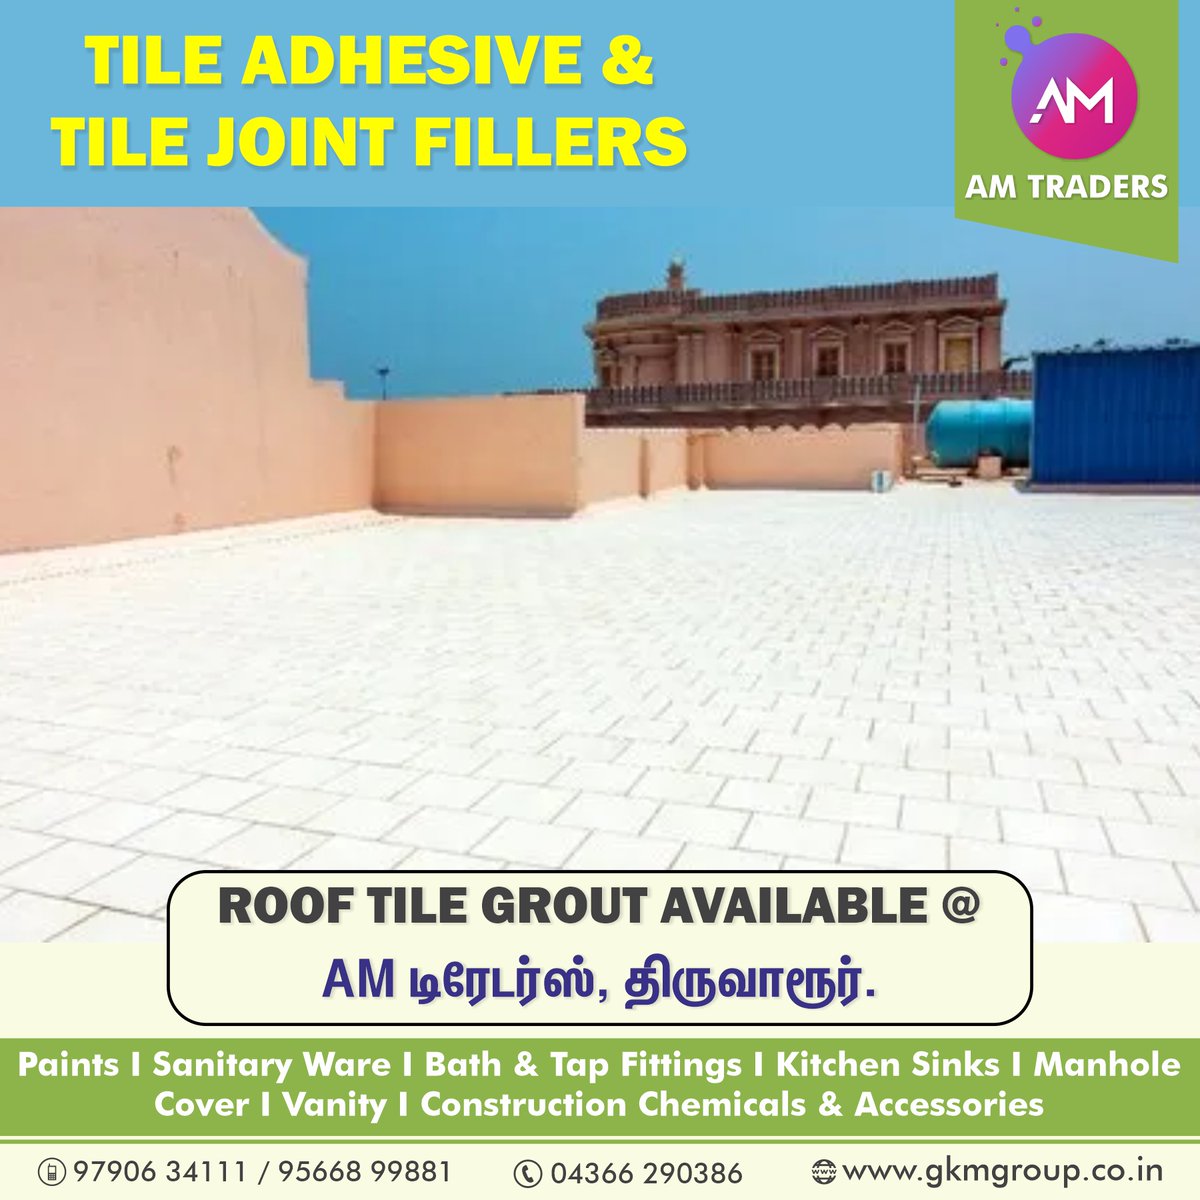 Anti Skid and Antifungal, water resistance grout for roof tiles available at AM TRADERS.

#antiskid #antifungal #waterresistance #waterresistant #waterproofing #rooftile #grout #rooftilegrout #amtraders #Thiruvarur